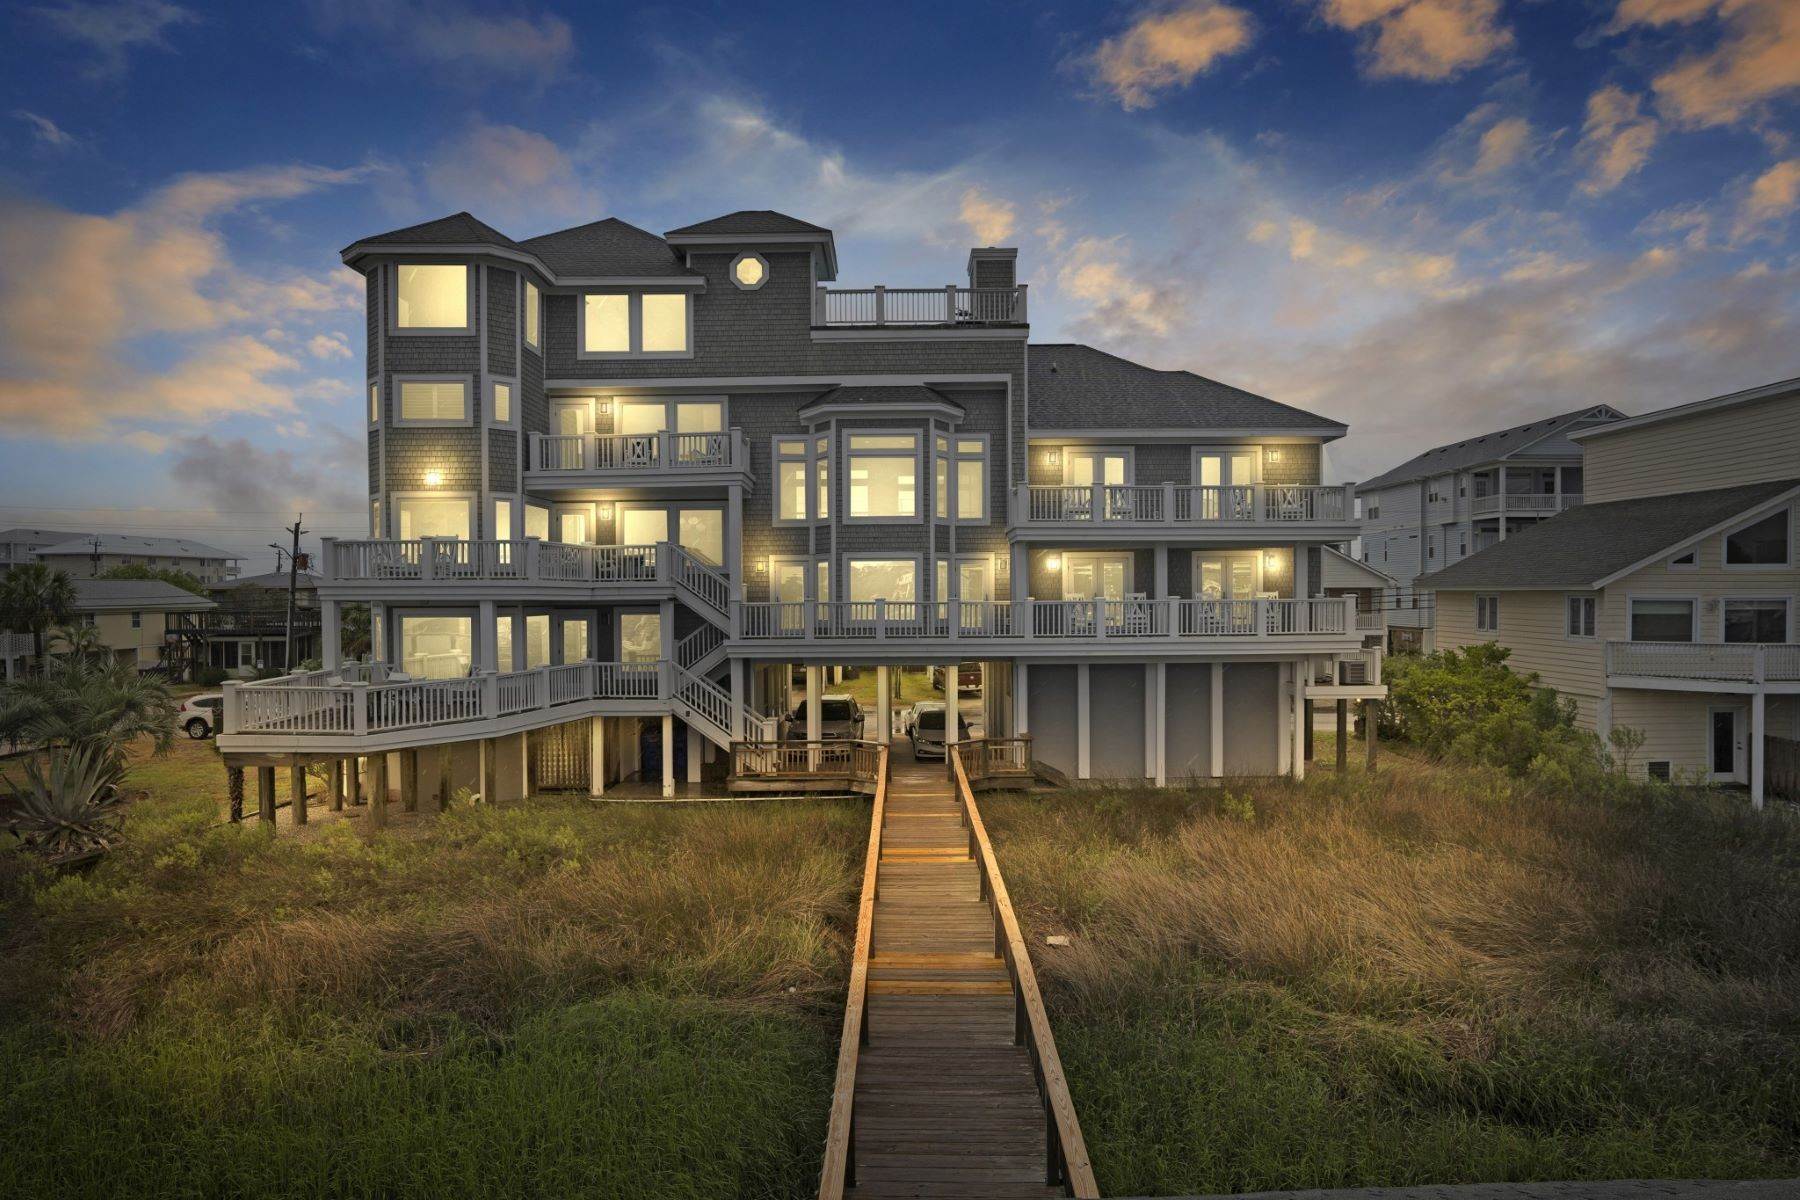 Single Family Homes for Sale at Magnificent Waterfront Island Home 1107 Canal Drive Carolina Beach, North Carolina 28428 United States